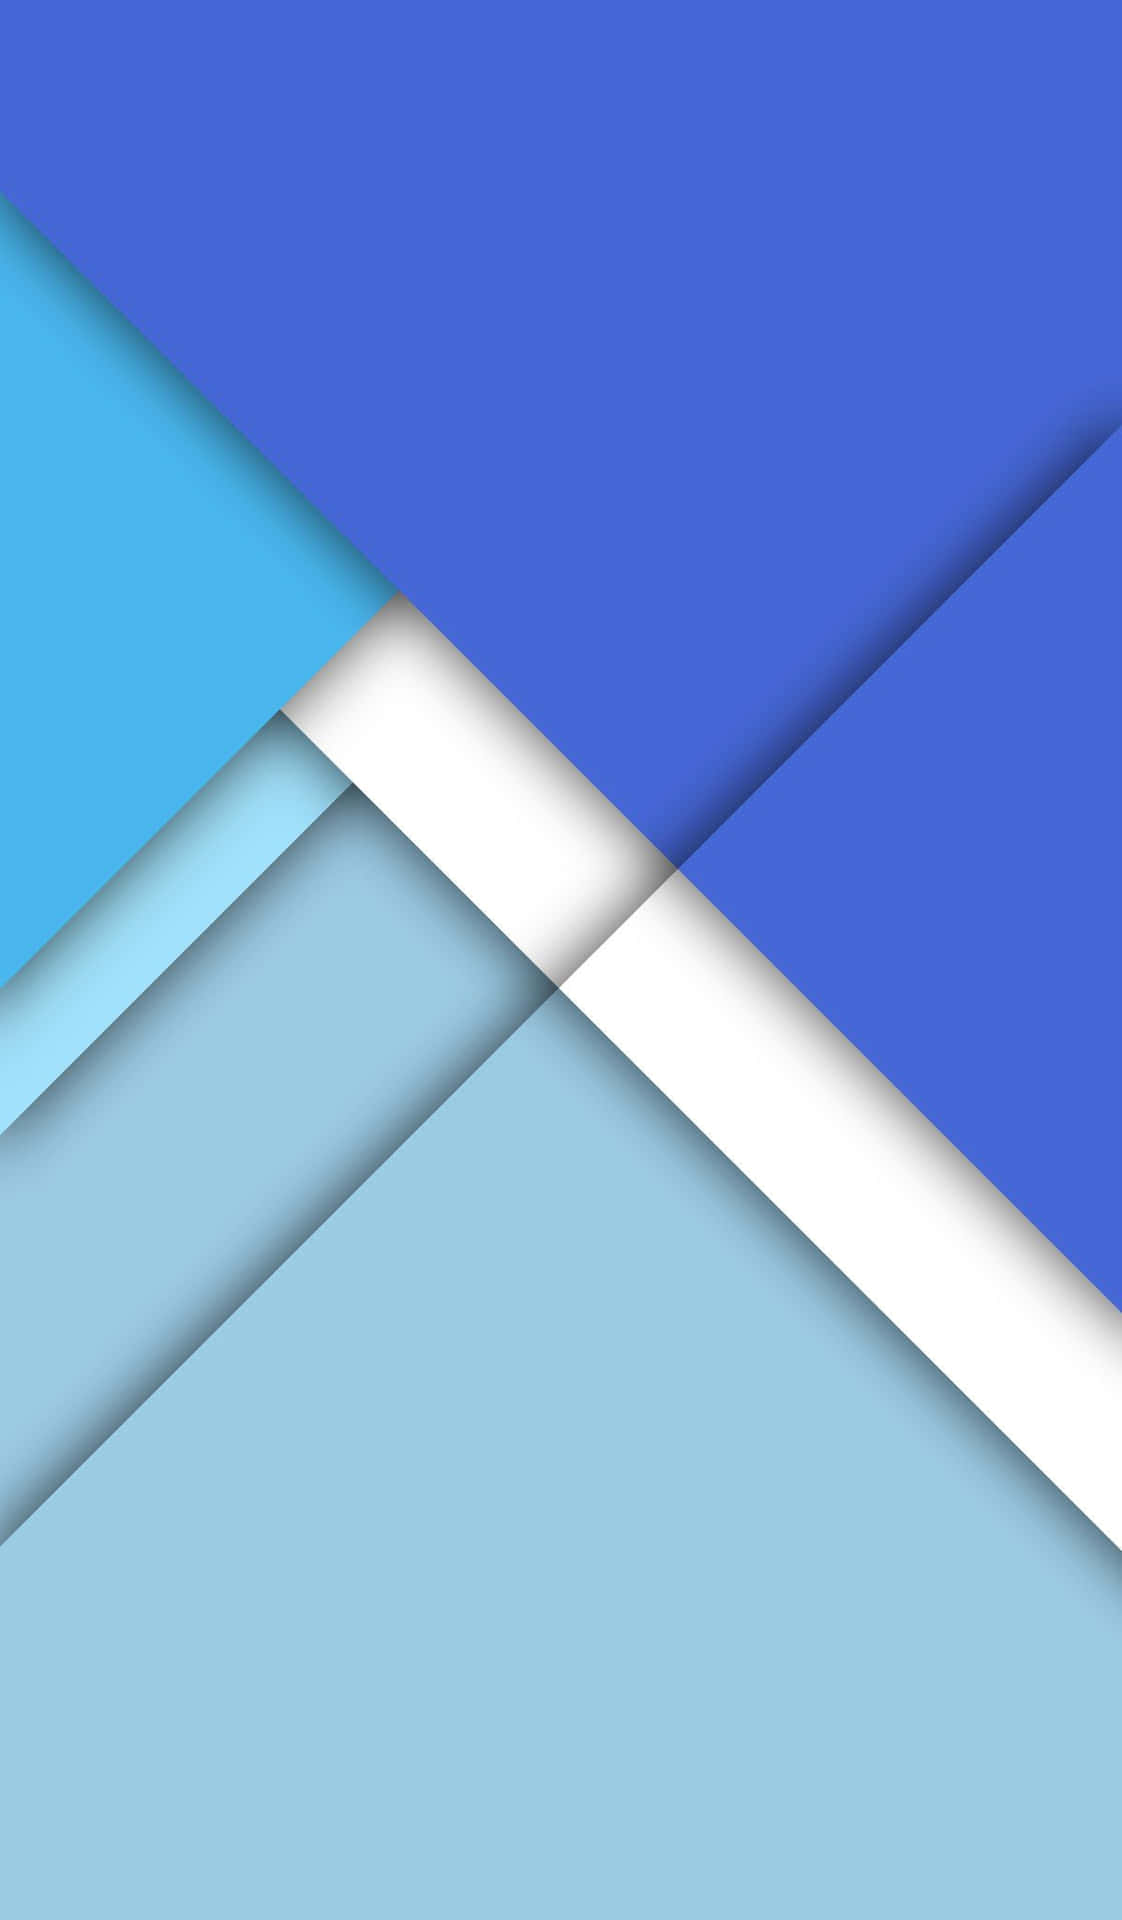 A Close-up Of Textured Material Using The Material Design Guidelines. Background